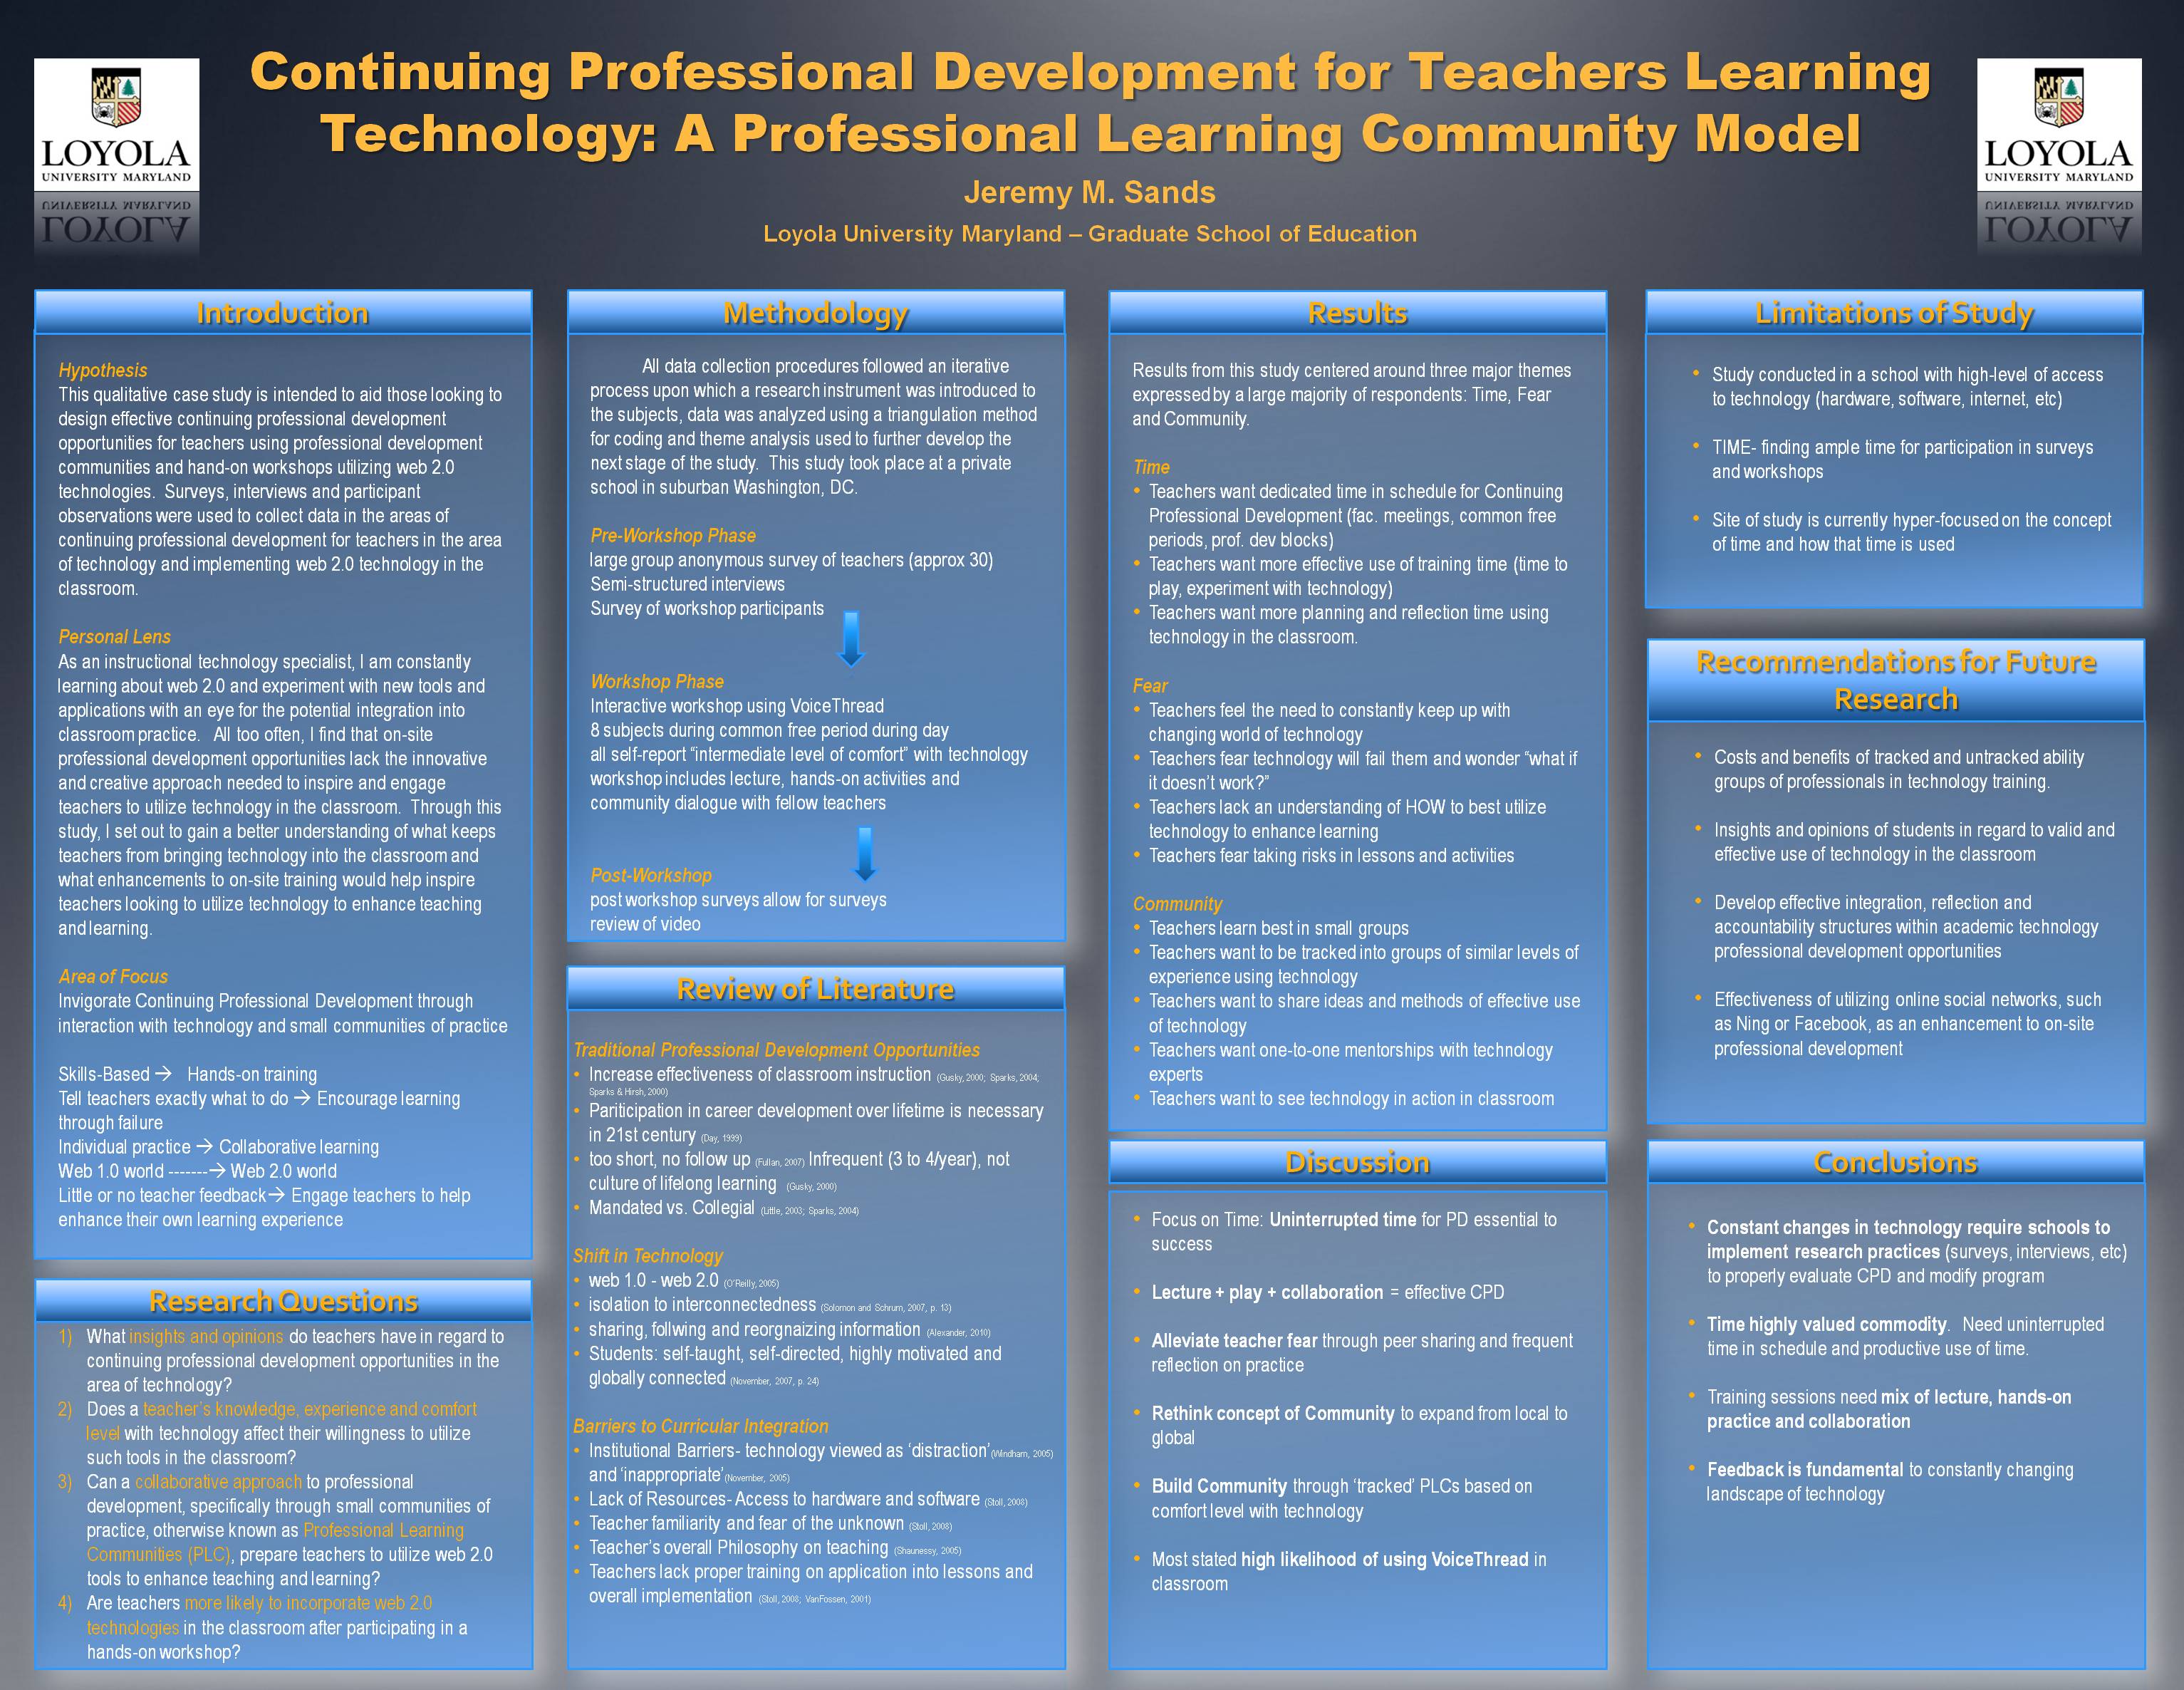 Poster image: Instructional Technology and Continuing Professional Development Opportunities for Teachers:  A Professional Learning Community Model